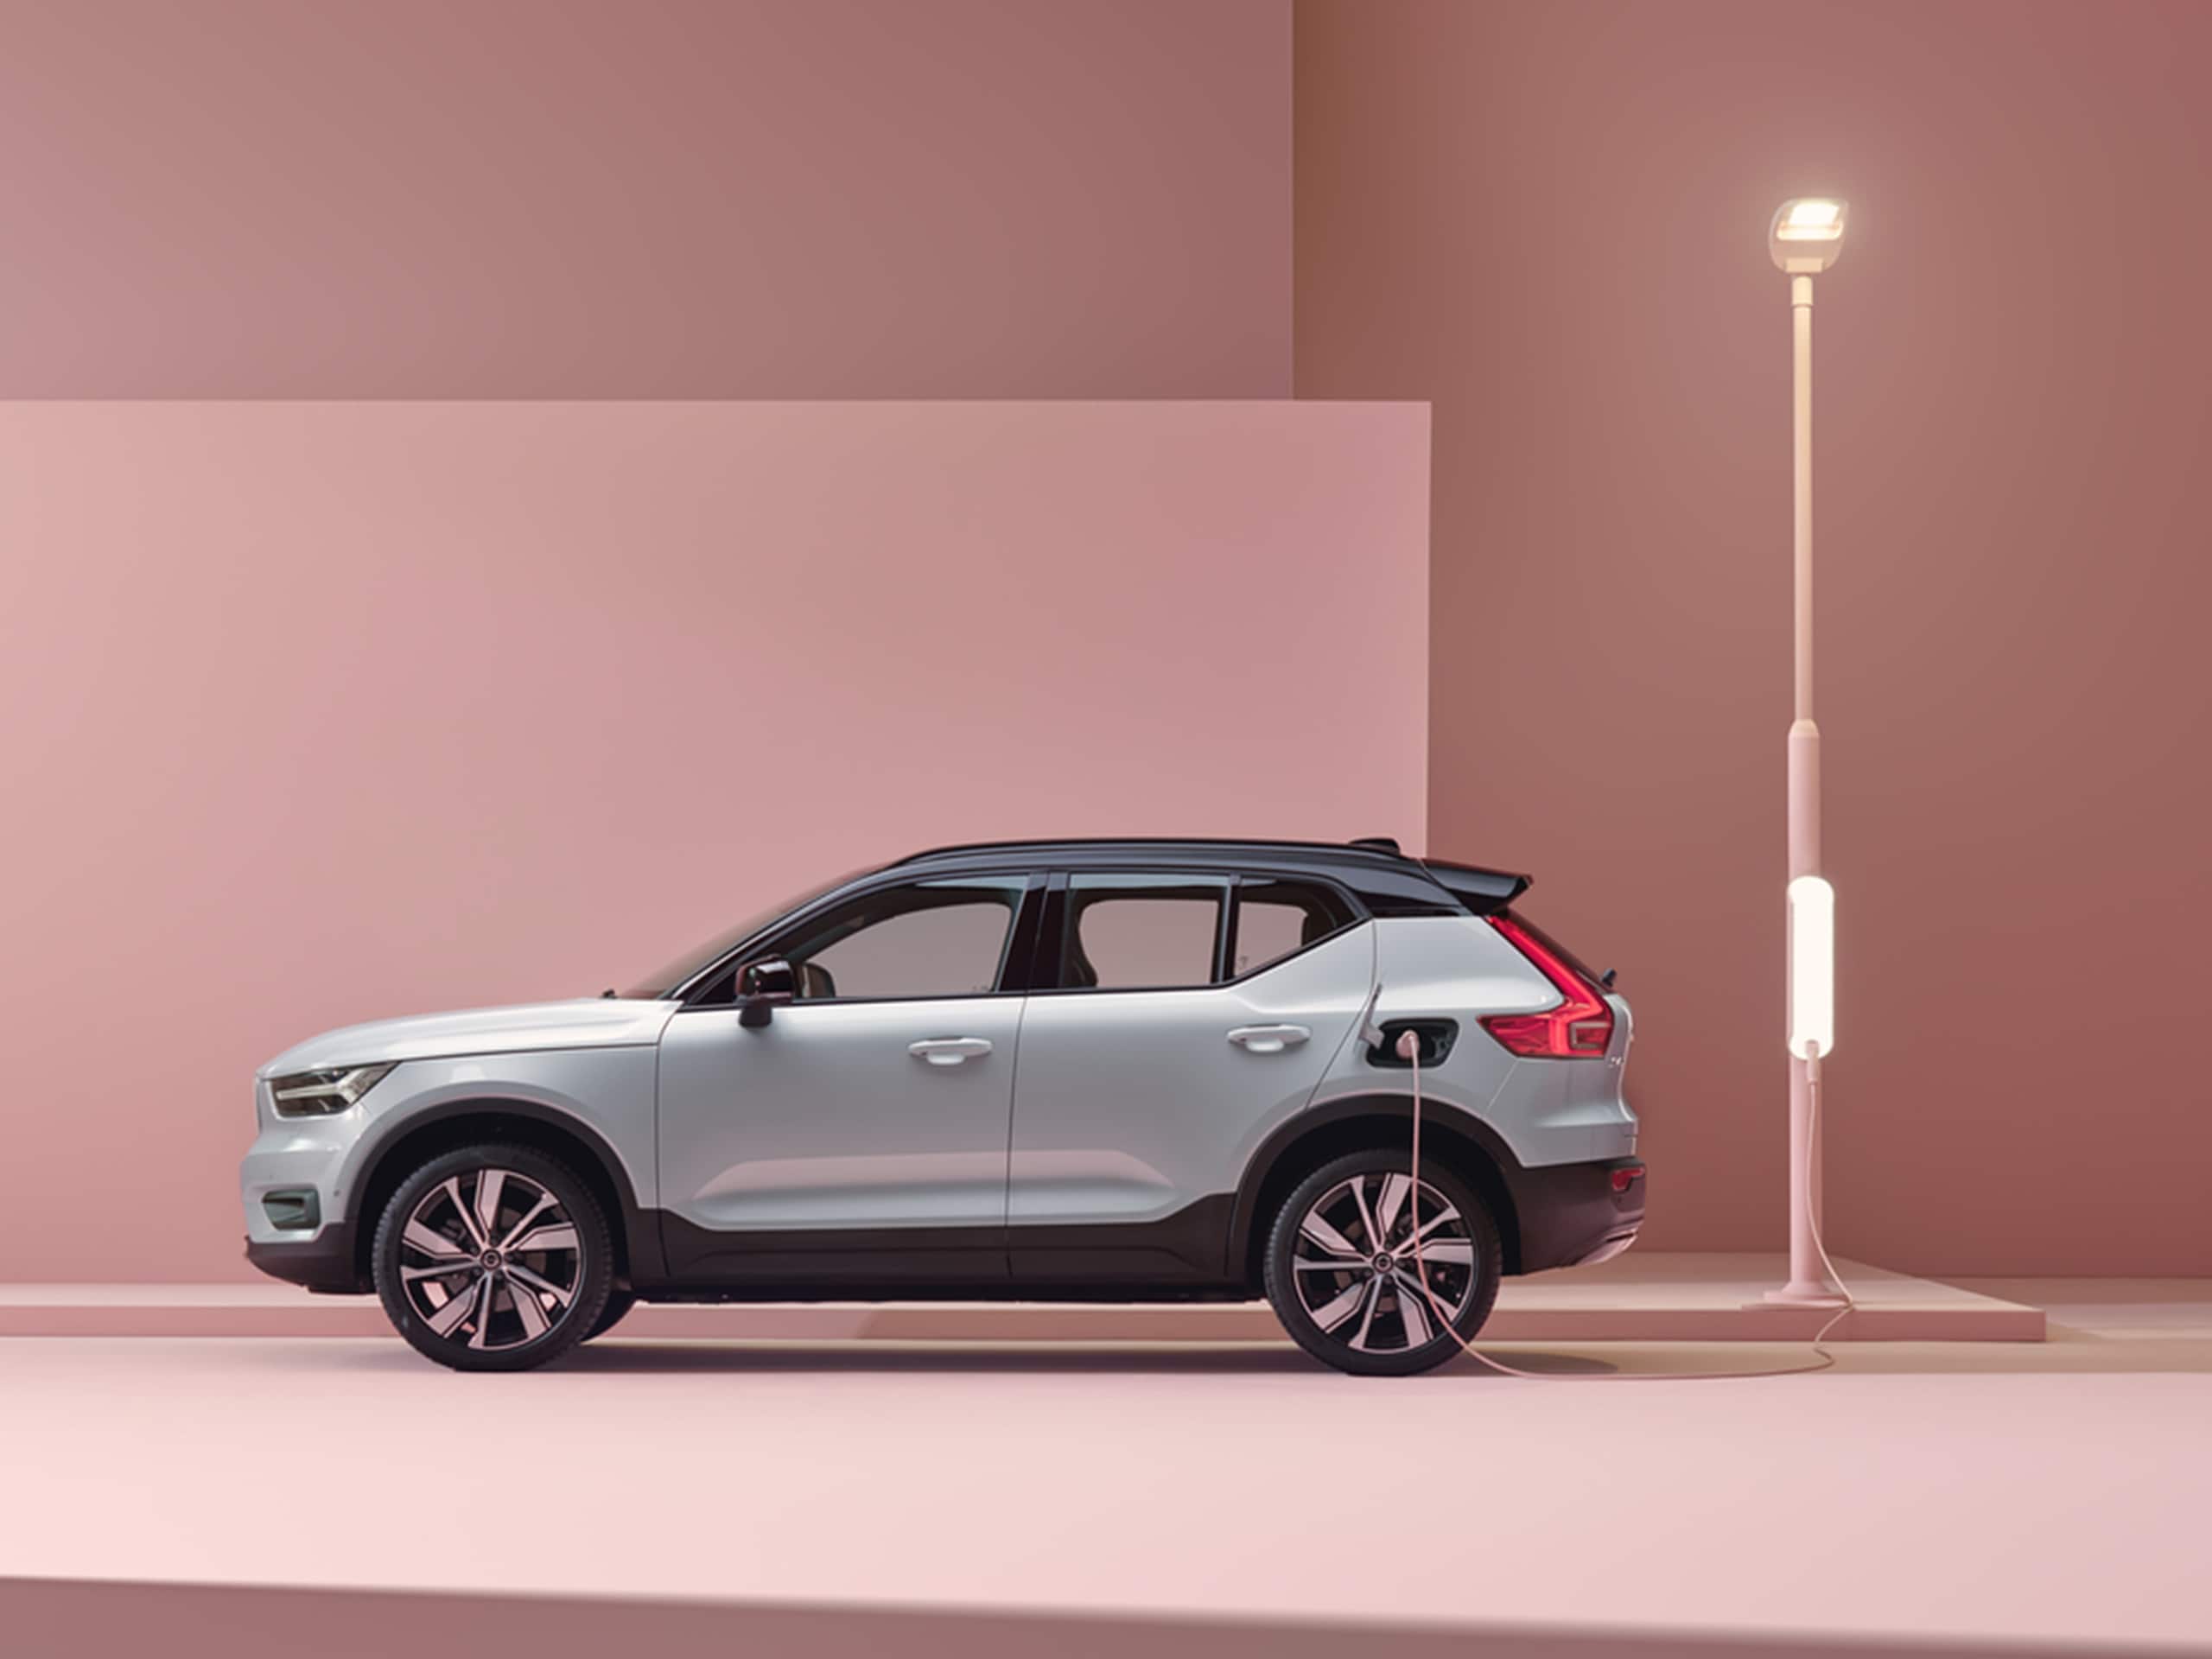 Volvo XC40 Recharge in ricarica in un ambiente rosa